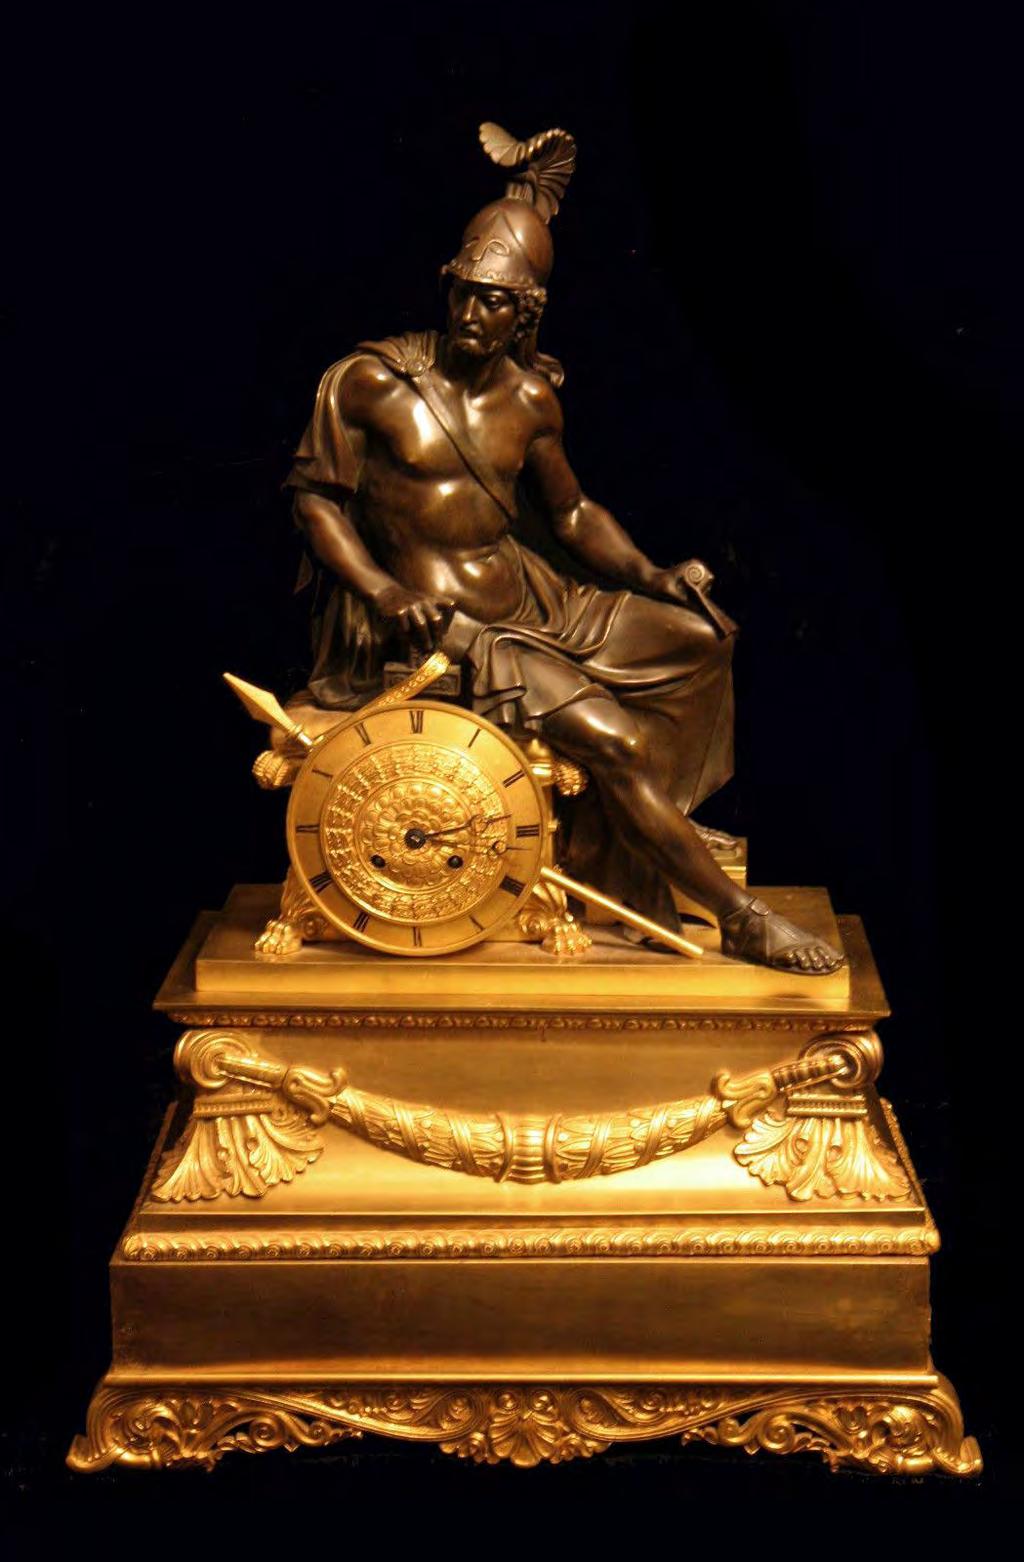 Direct from a Private Mansion in Paris, A Stunning Early 19th Century, "Louis XVI", Gold Plated Bronze and Bronze Patina Mantel Clock by One of France's